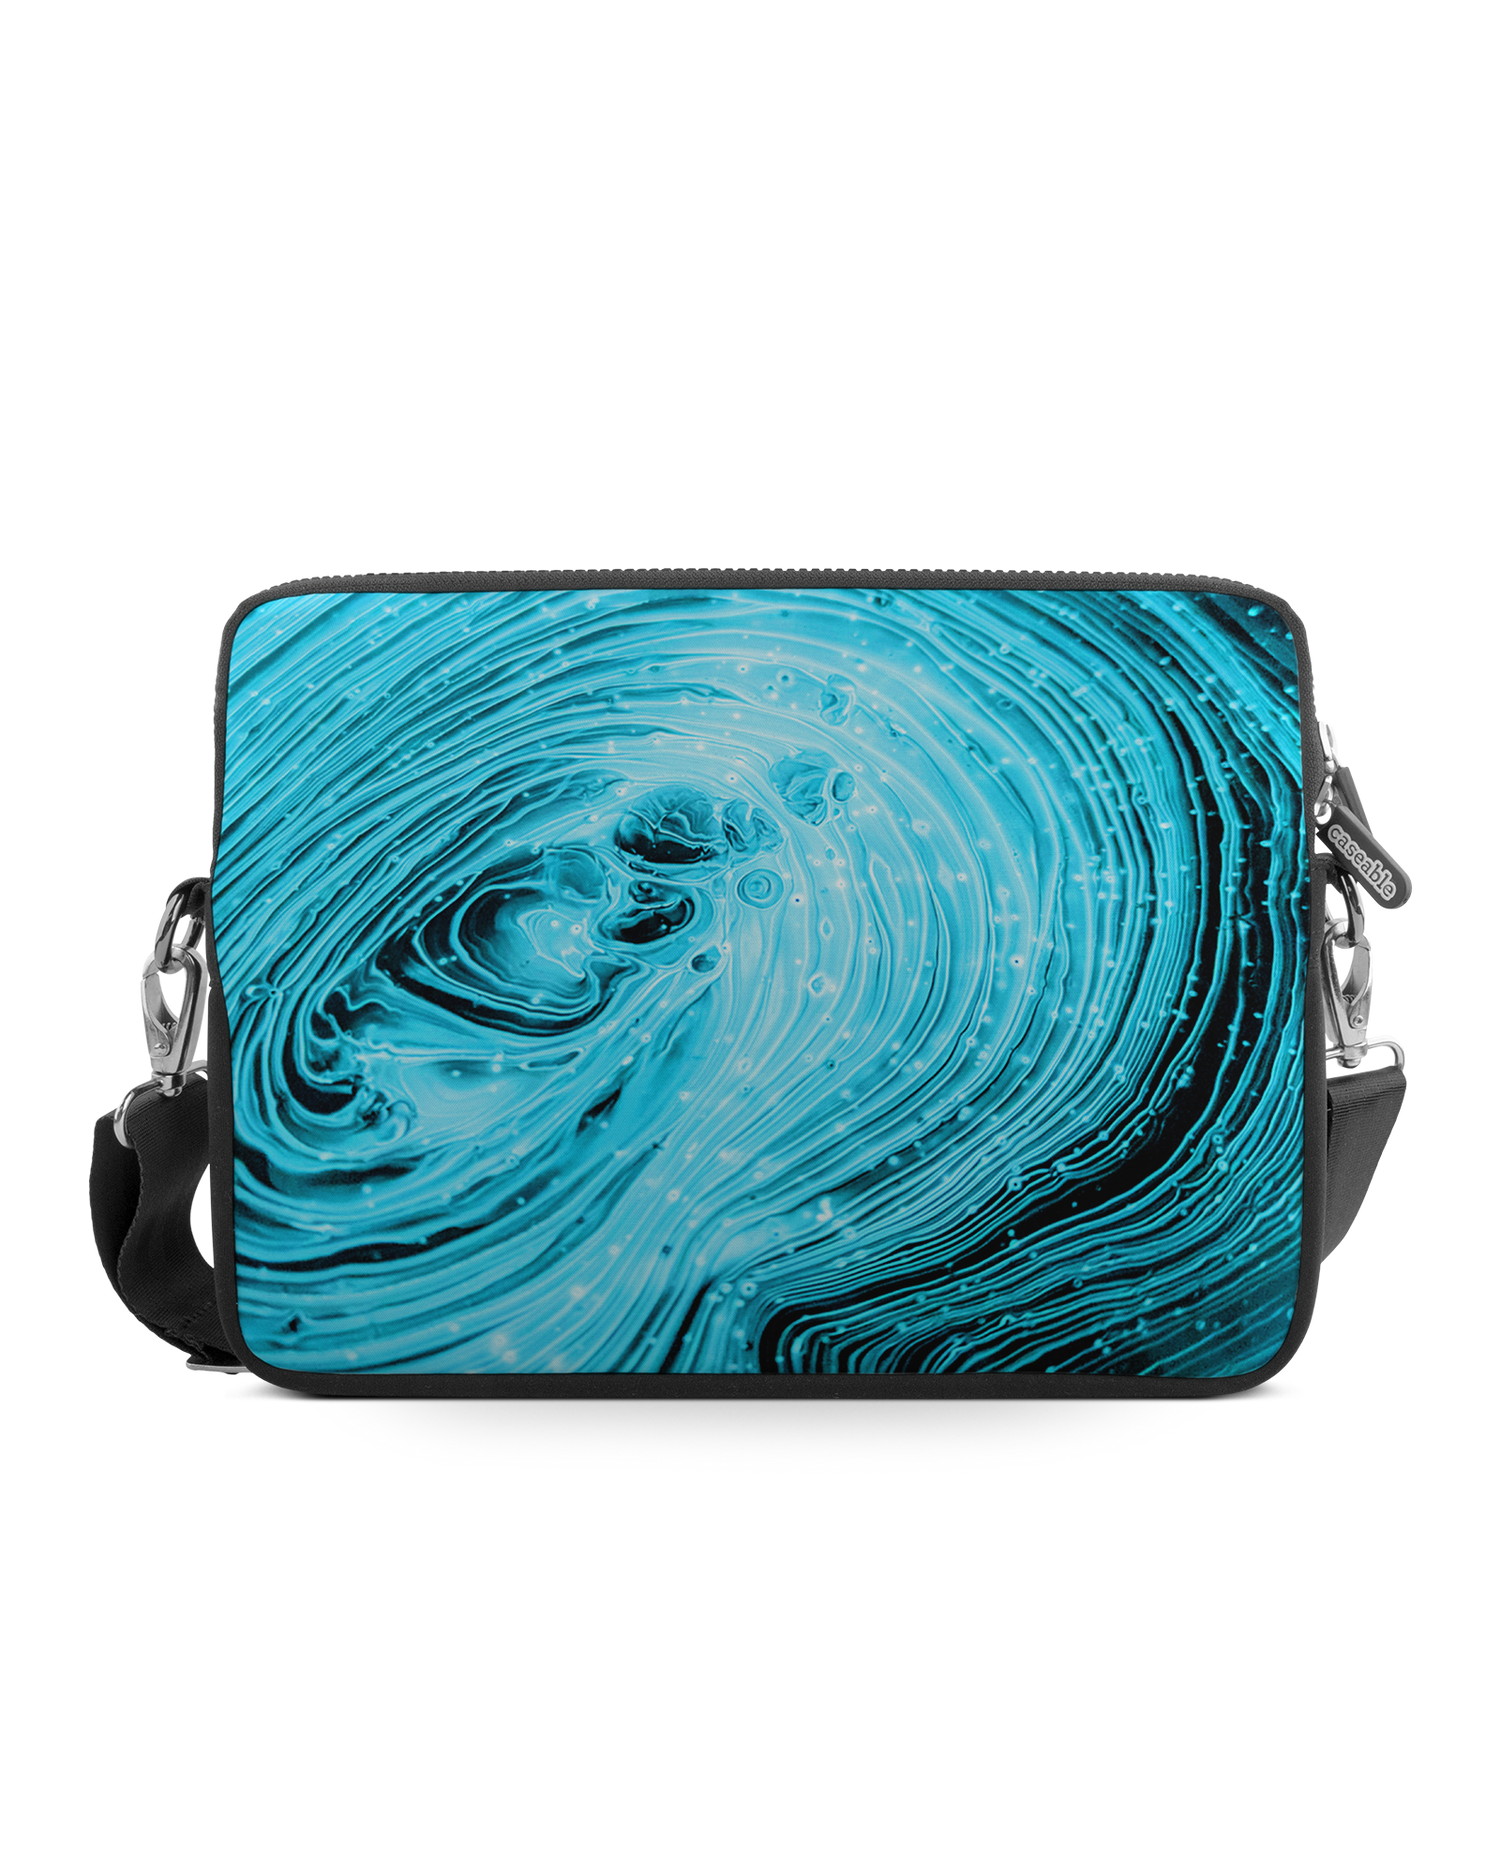 Turquoise Ripples Premium Laptop Bag 17 inch: Front View